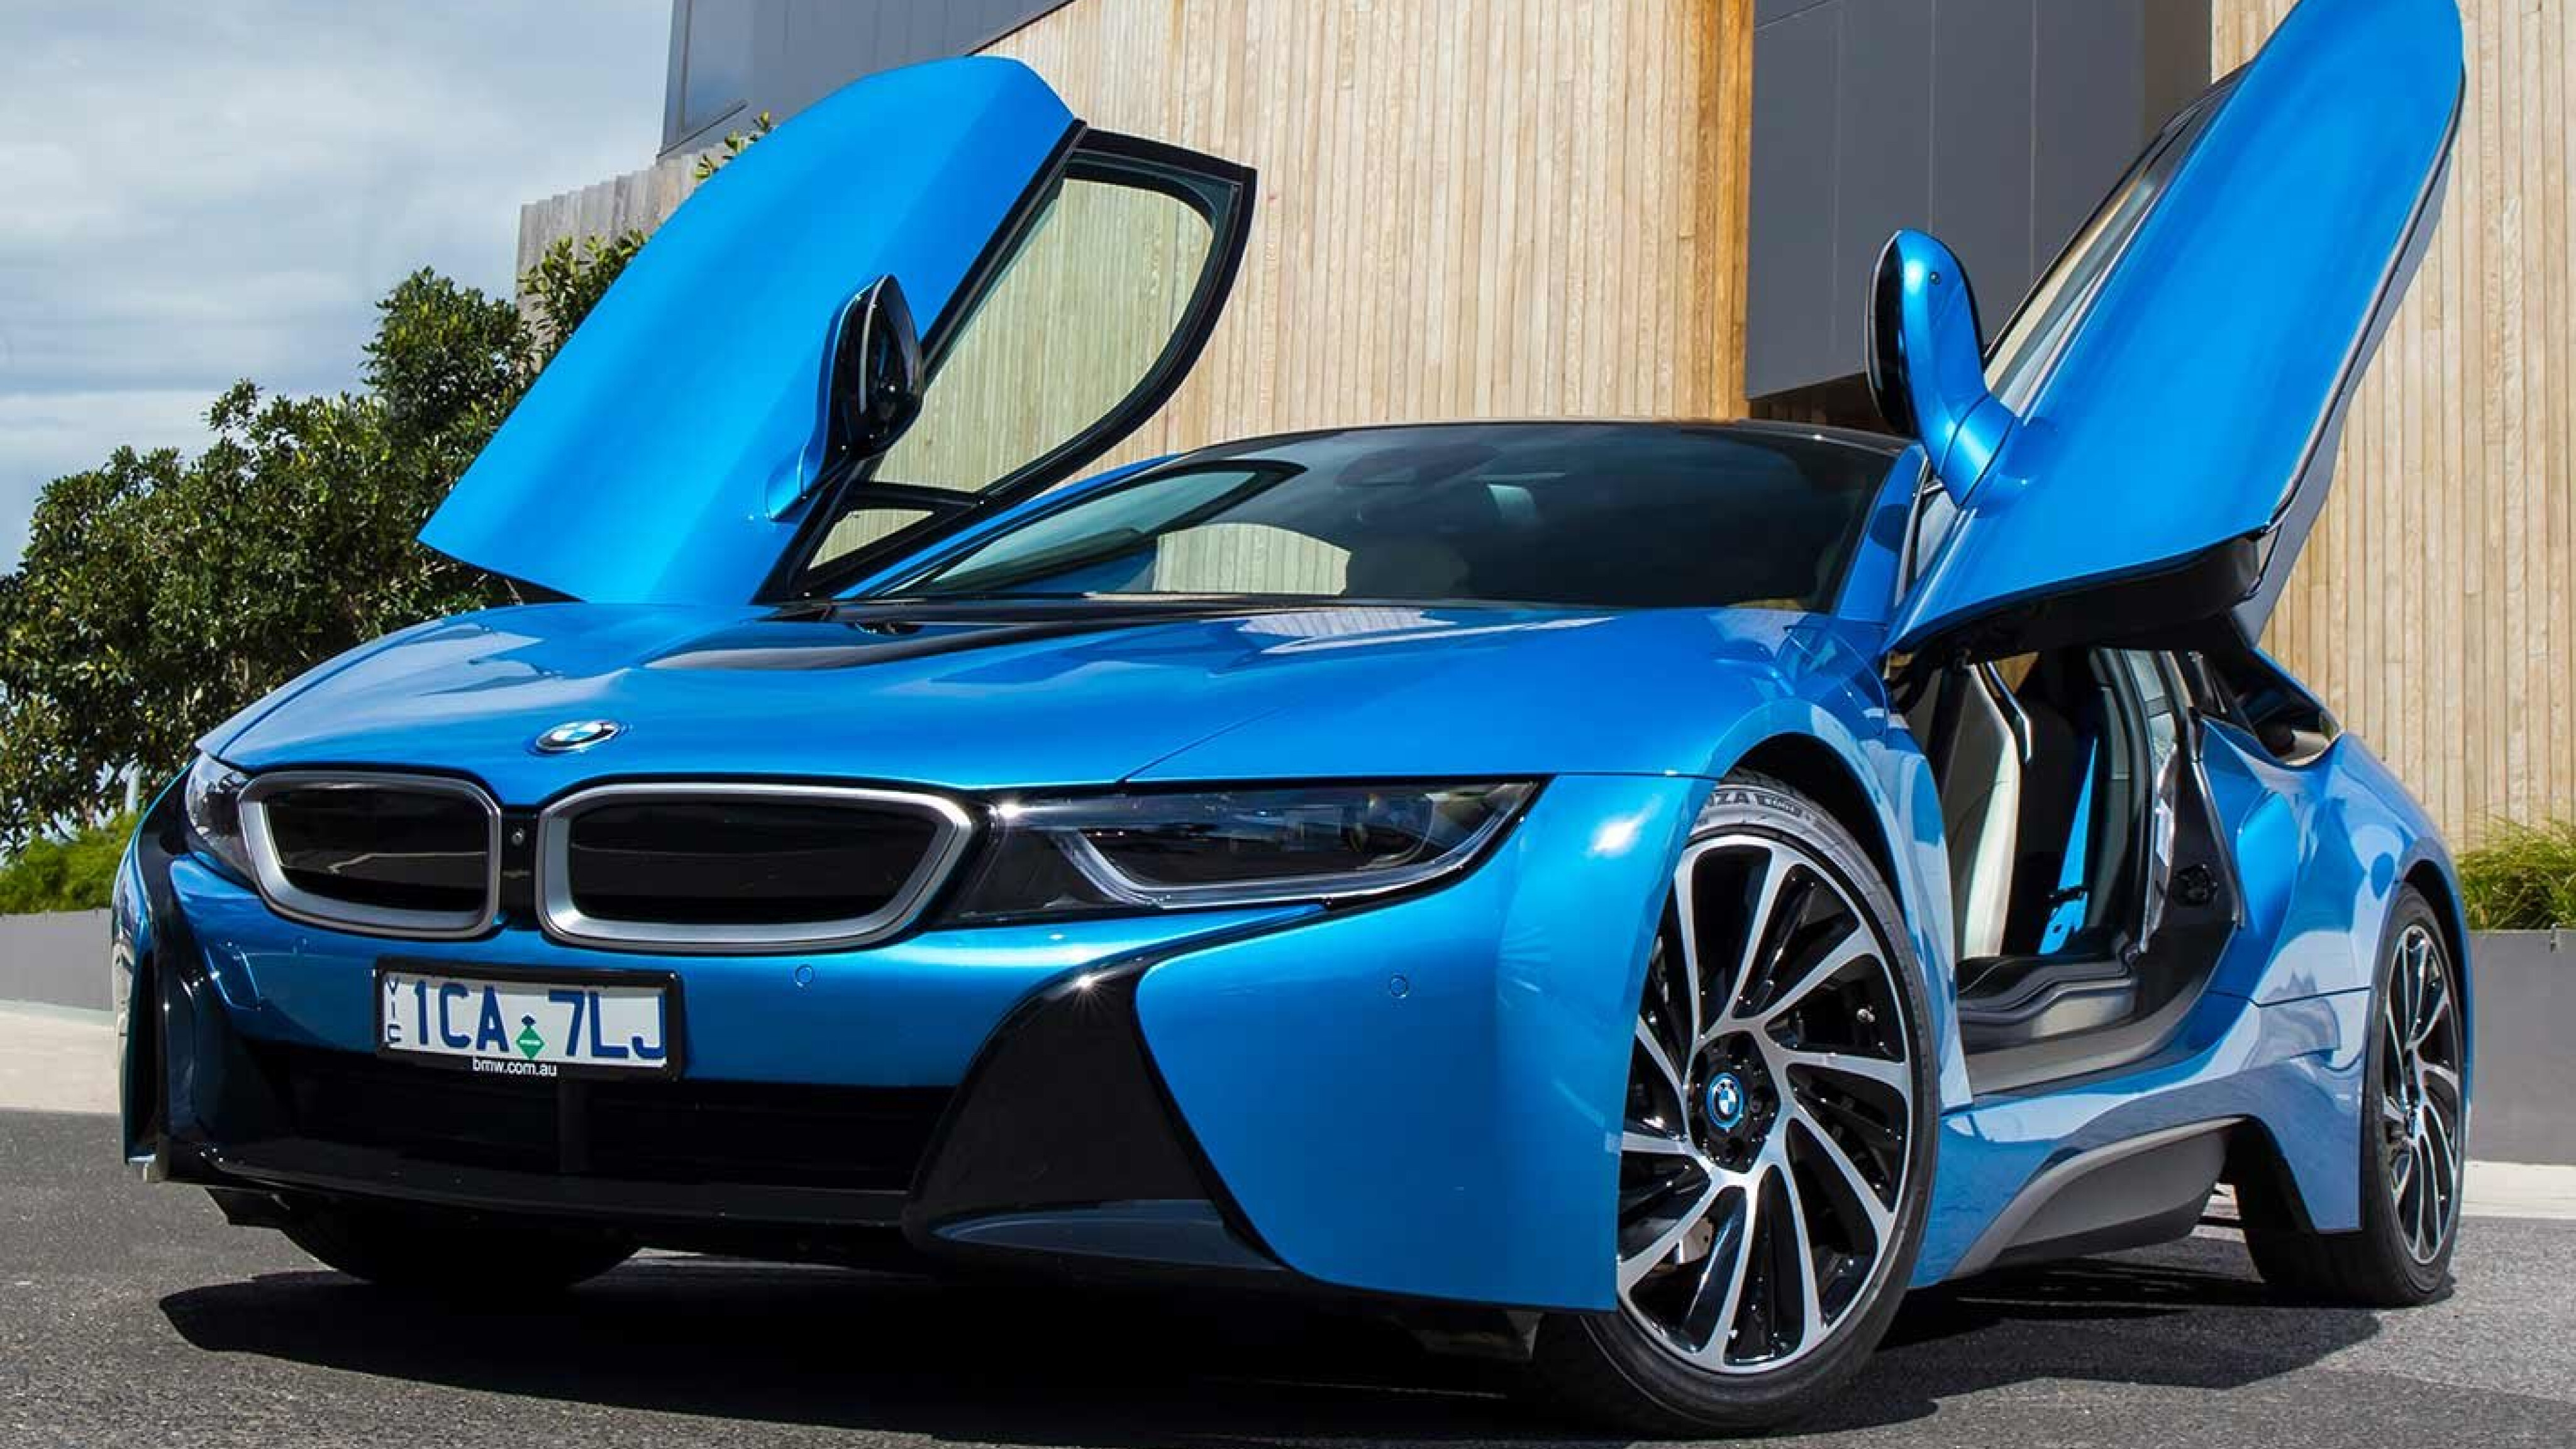 Photo gallery of the stunning BMW i8 - 1/11